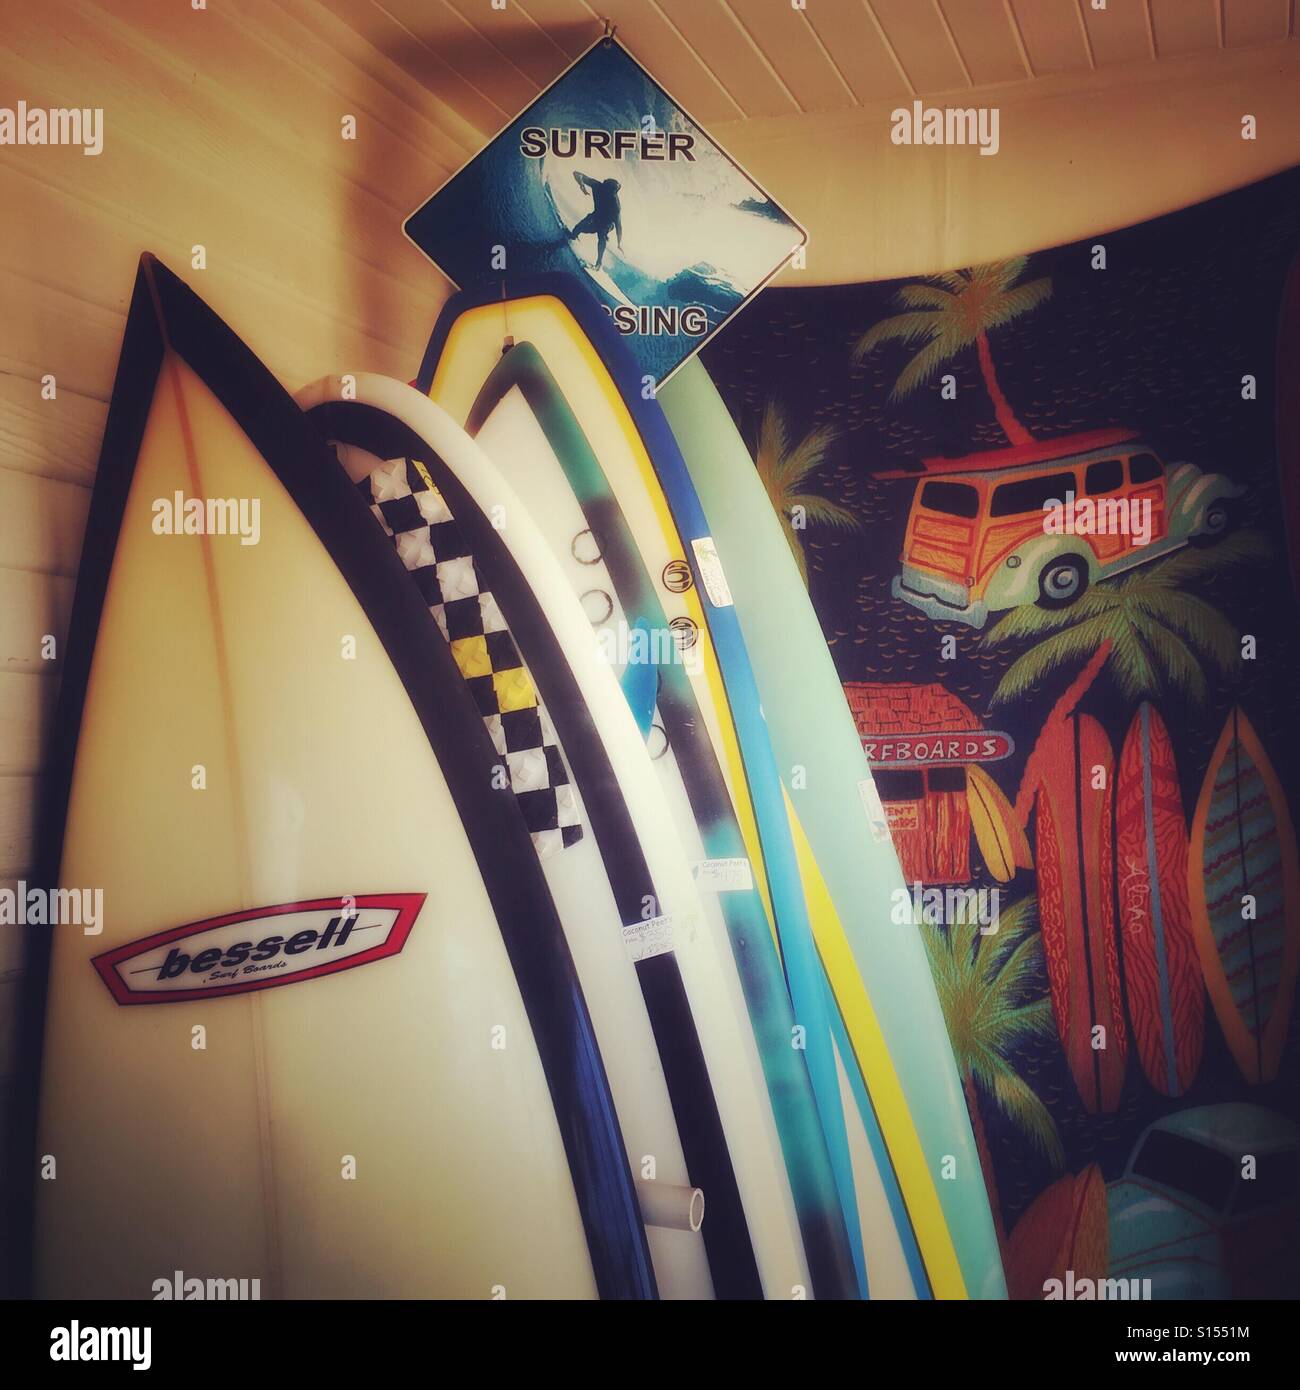 Surfing Life- boards stacked in corner of room in San Diego, CA. Stock Photo